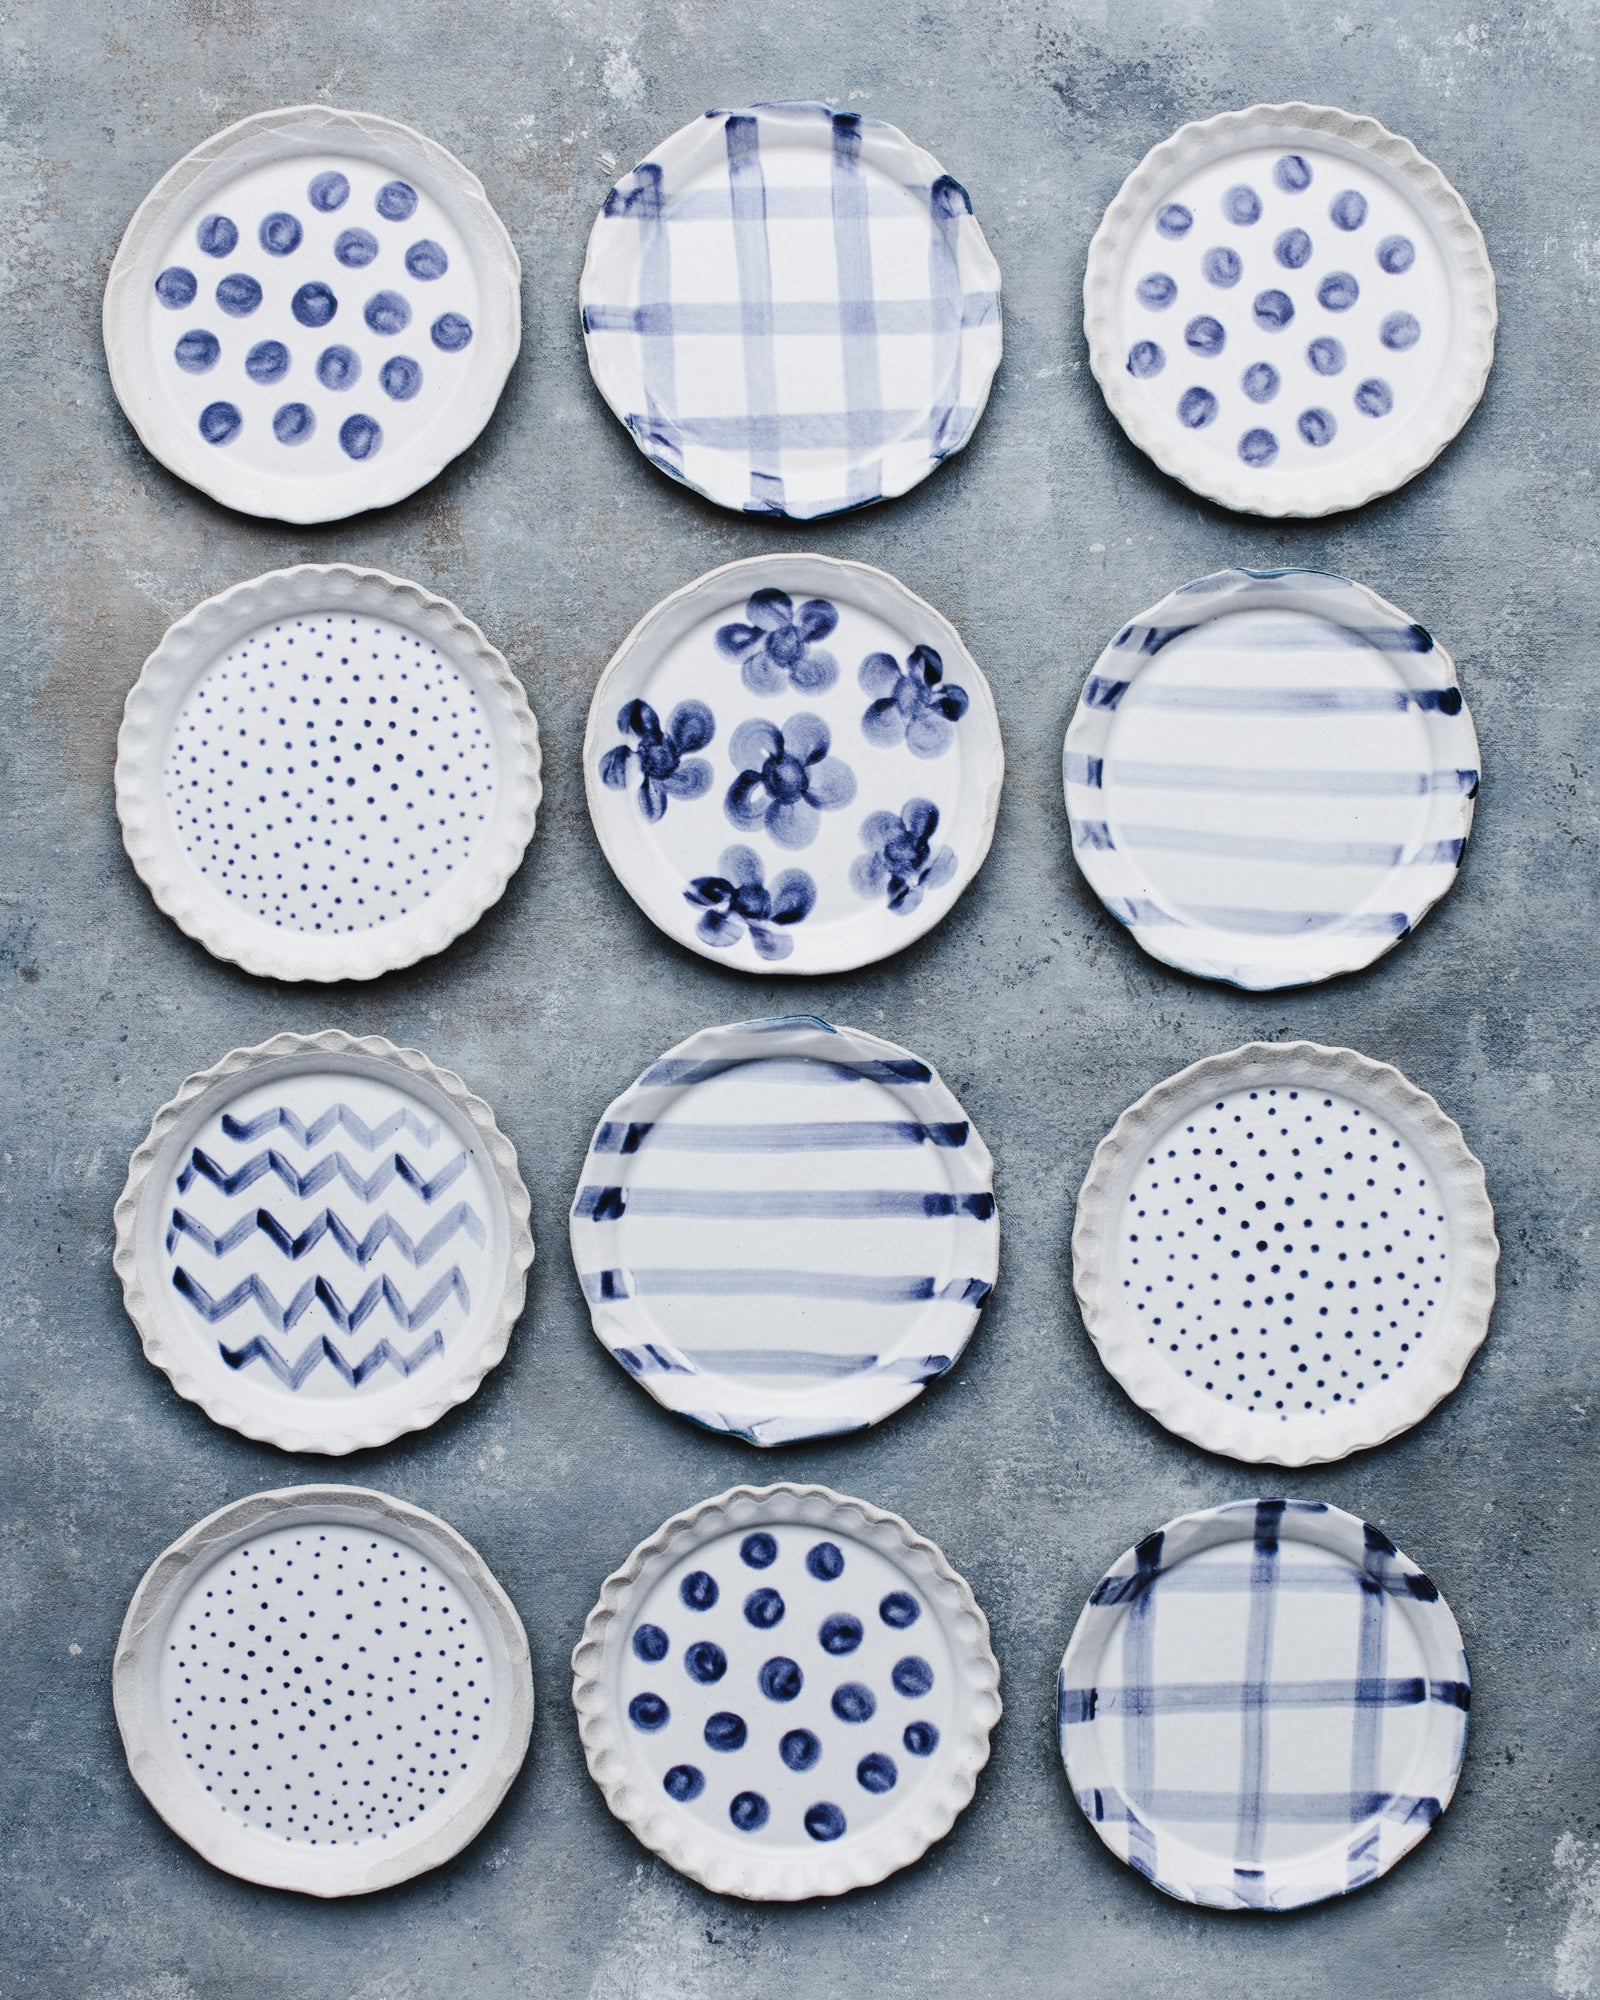 Blue and white decorative patterned cake plates by clay beehive ceramics